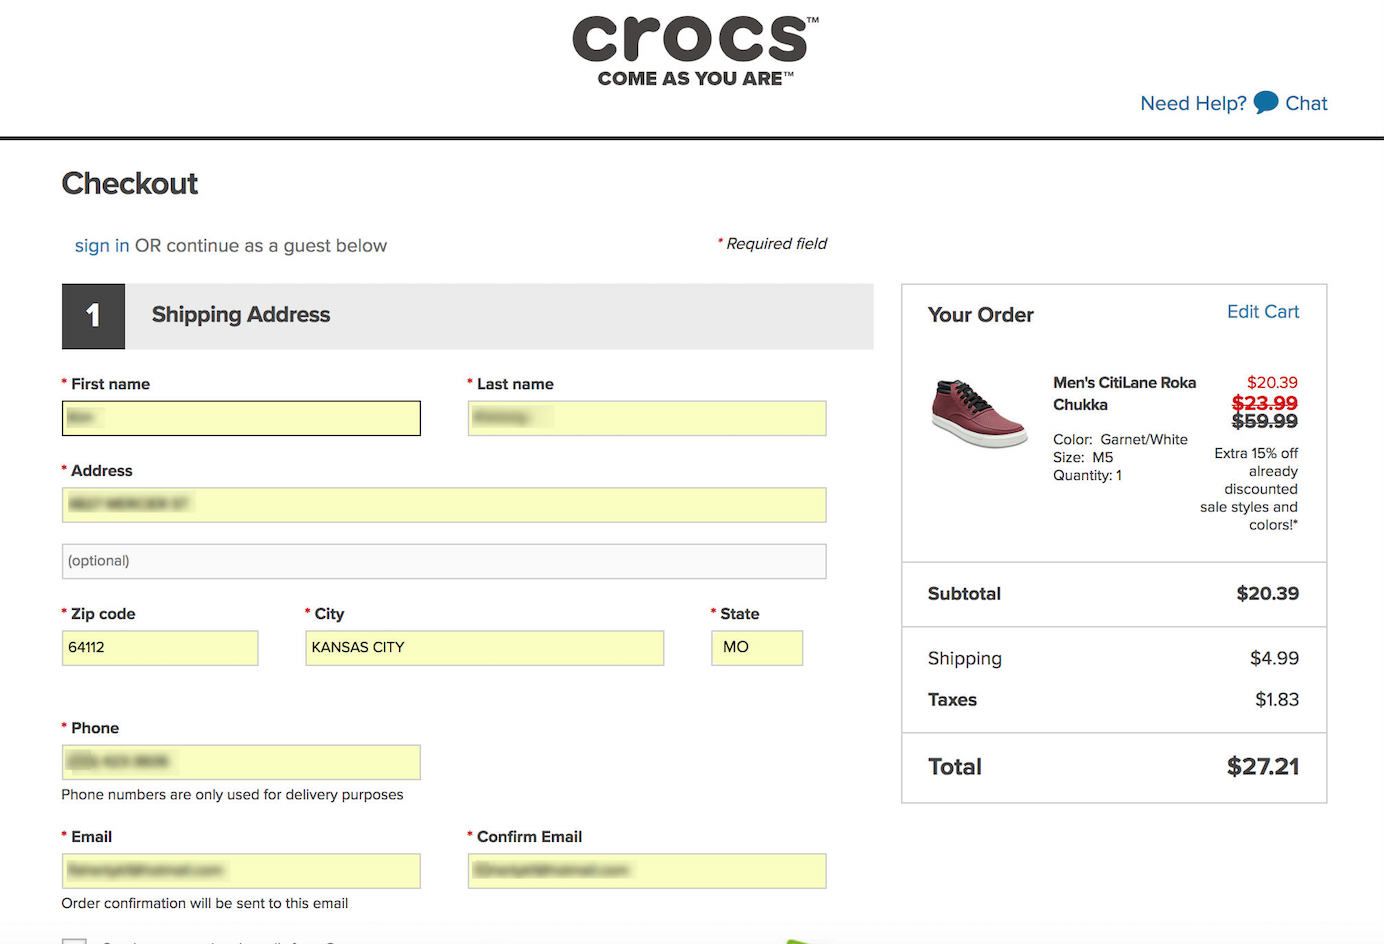 Crocs is transparent about fees and costs on its cart checkout page.